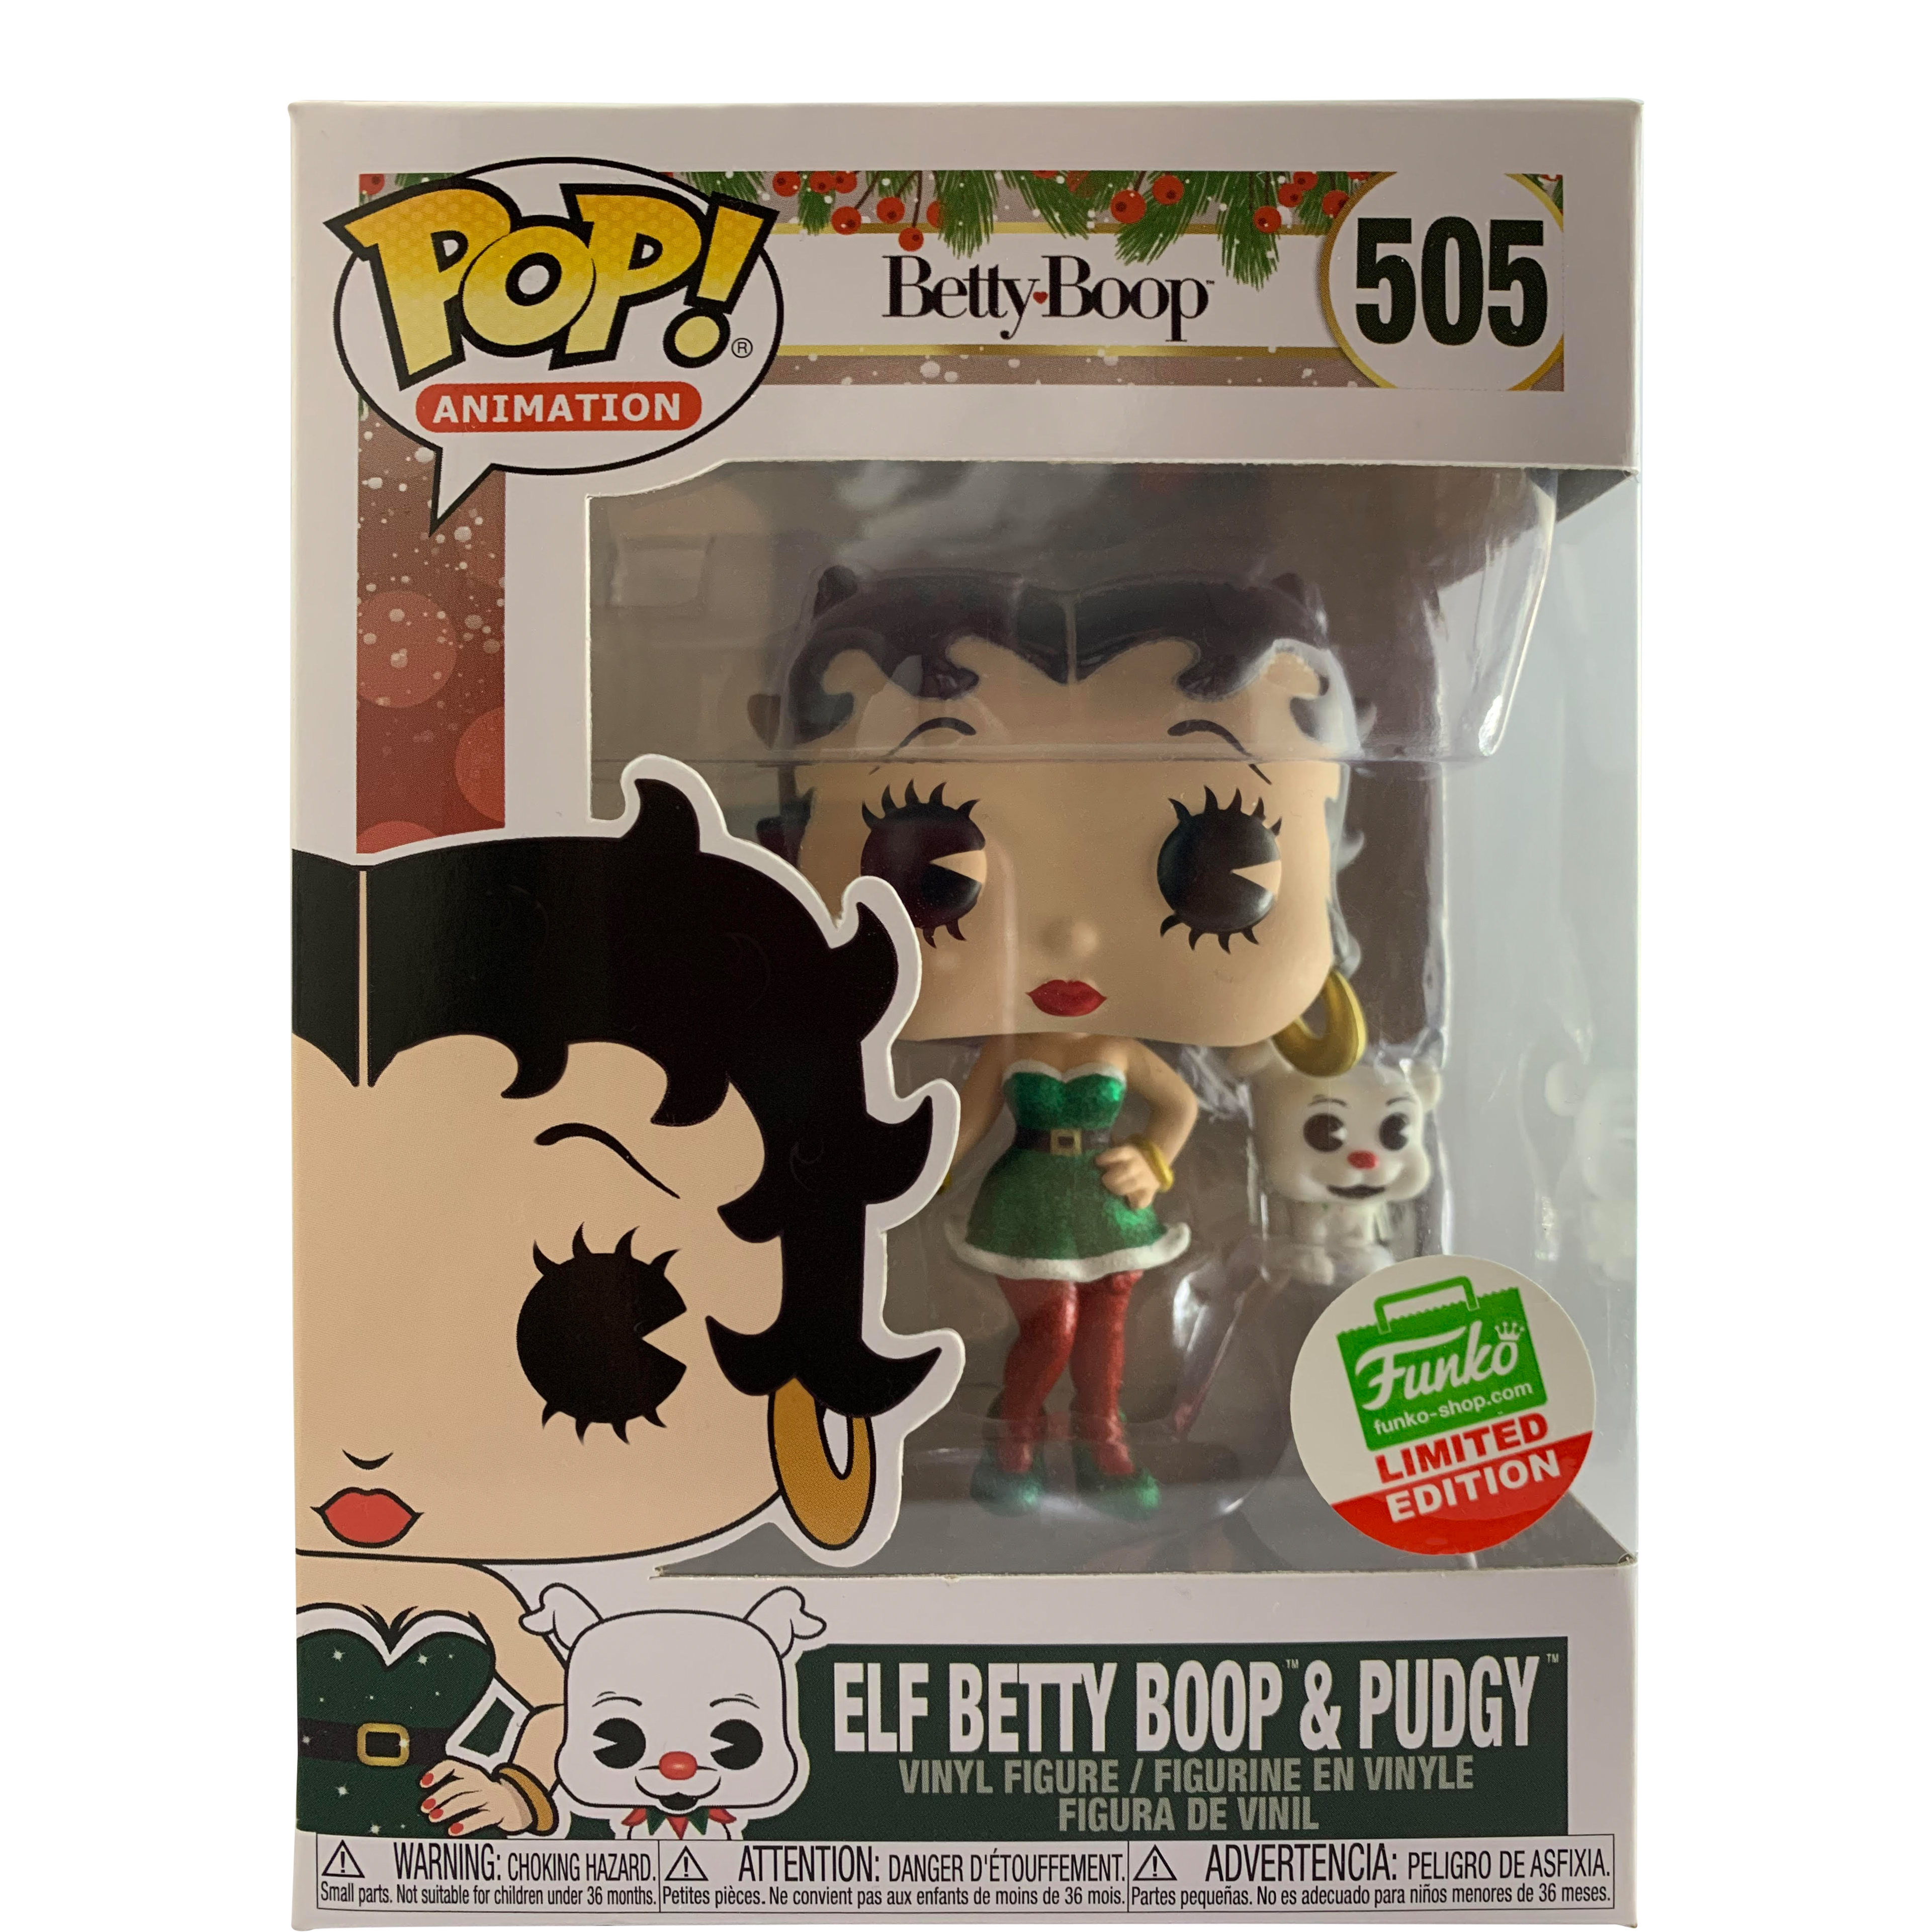 Funko Pop! Animation Betty Boop Elf Betty Boop and Pudgy Funko